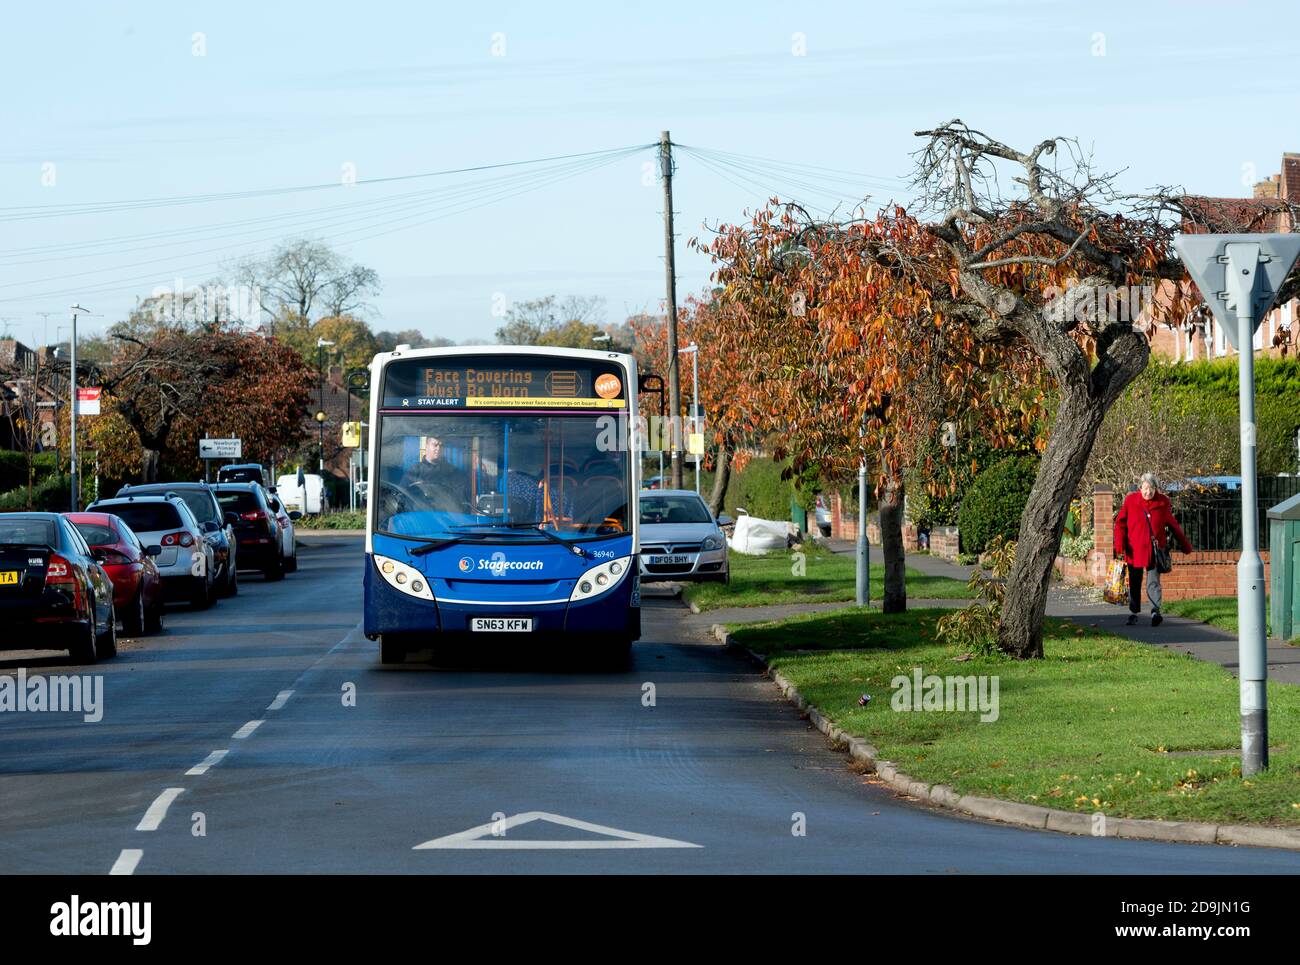 A Stagecoach X18 bus service with 'Face covering must be worn' notice, Warwick, UK Stock Photo